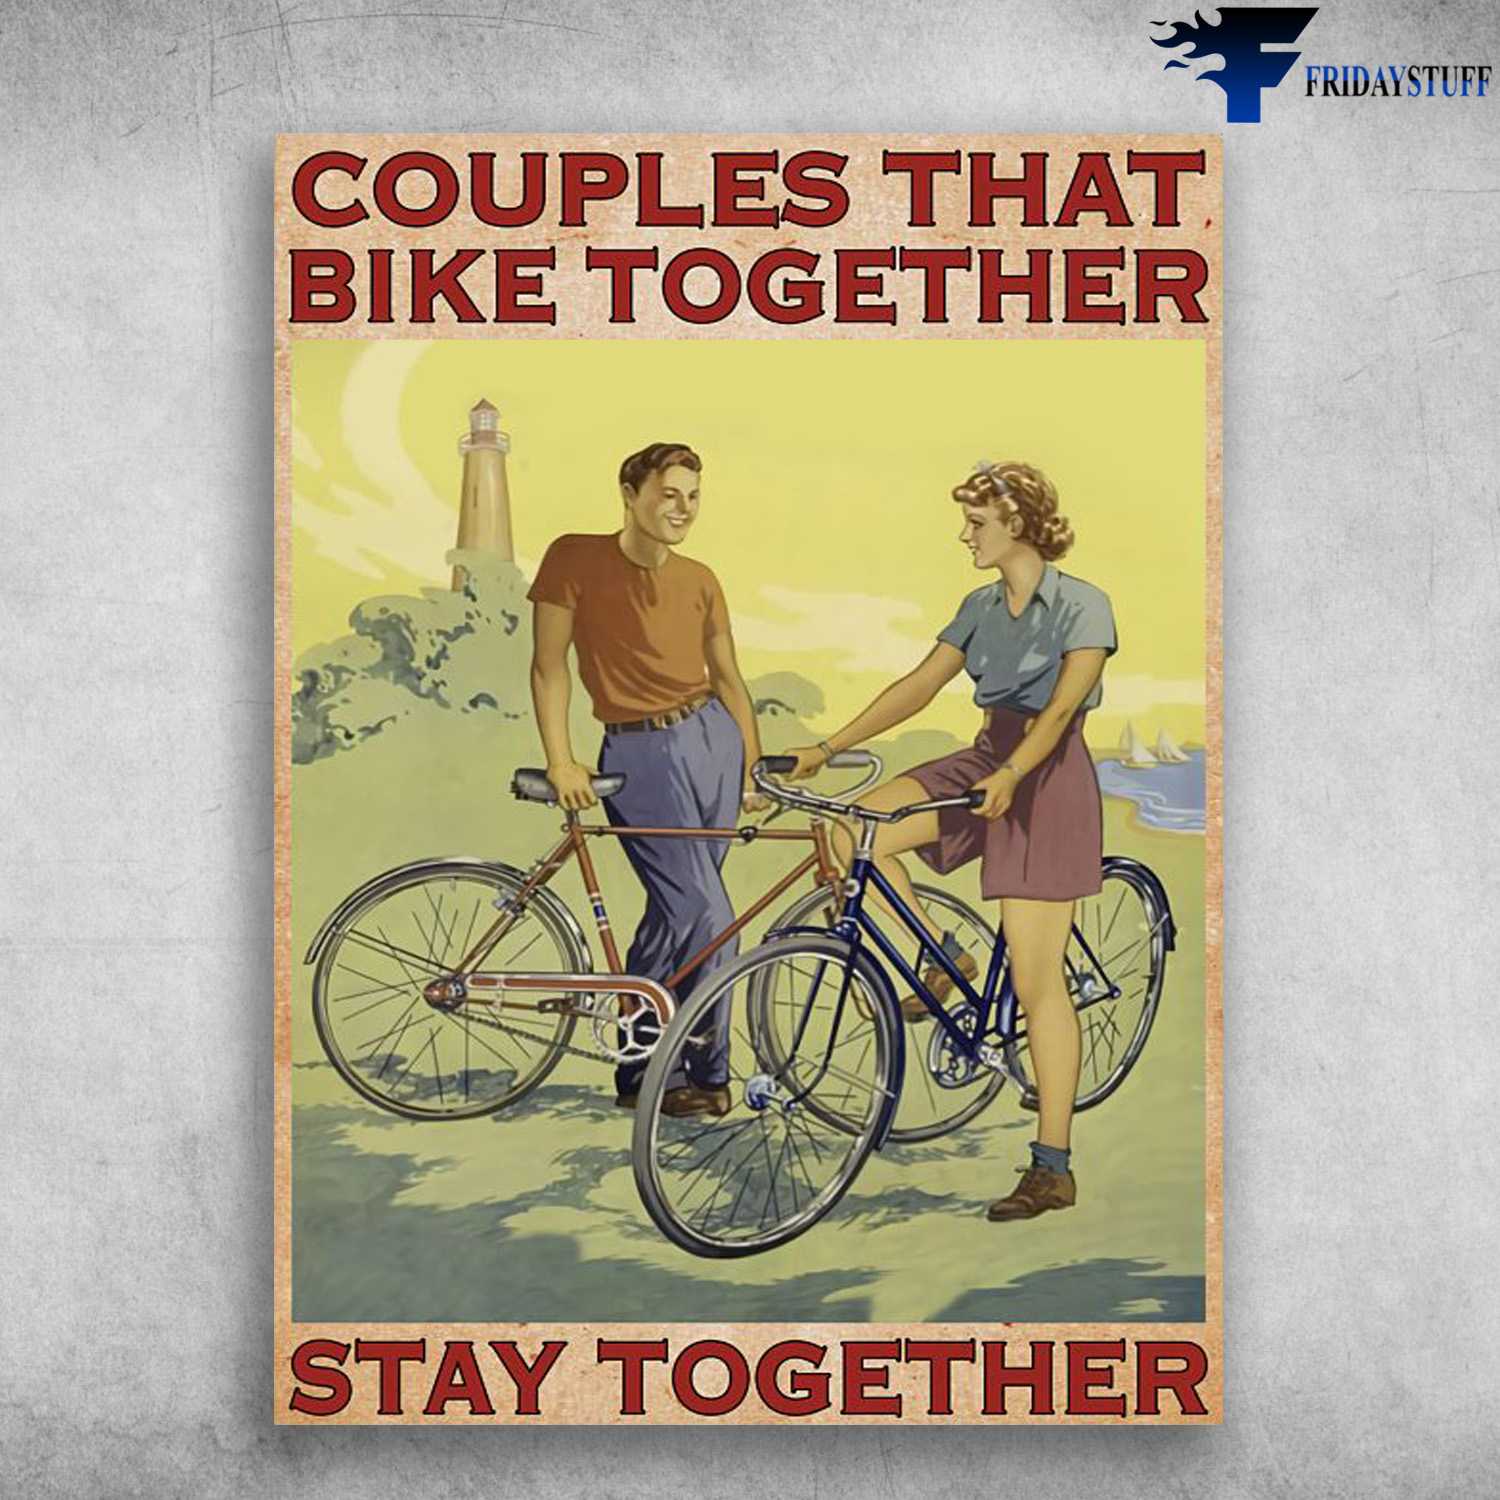 Cycling Lover, Couple Poster, Couples That Bike Together, Stay Together